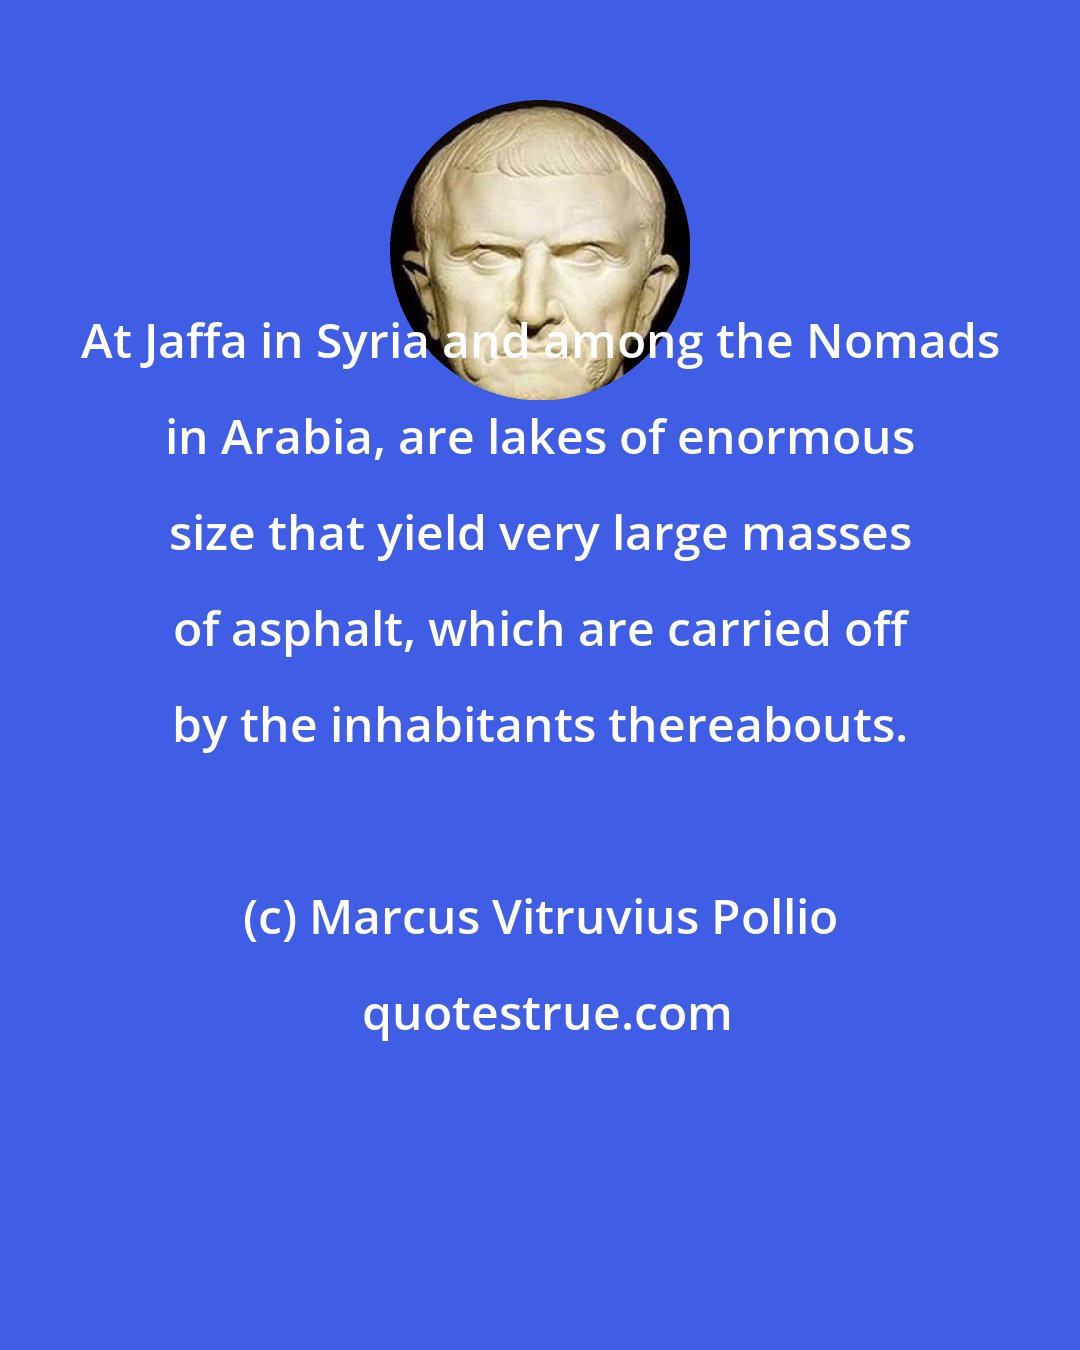 Marcus Vitruvius Pollio: At Jaffa in Syria and among the Nomads in Arabia, are lakes of enormous size that yield very large masses of asphalt, which are carried off by the inhabitants thereabouts.